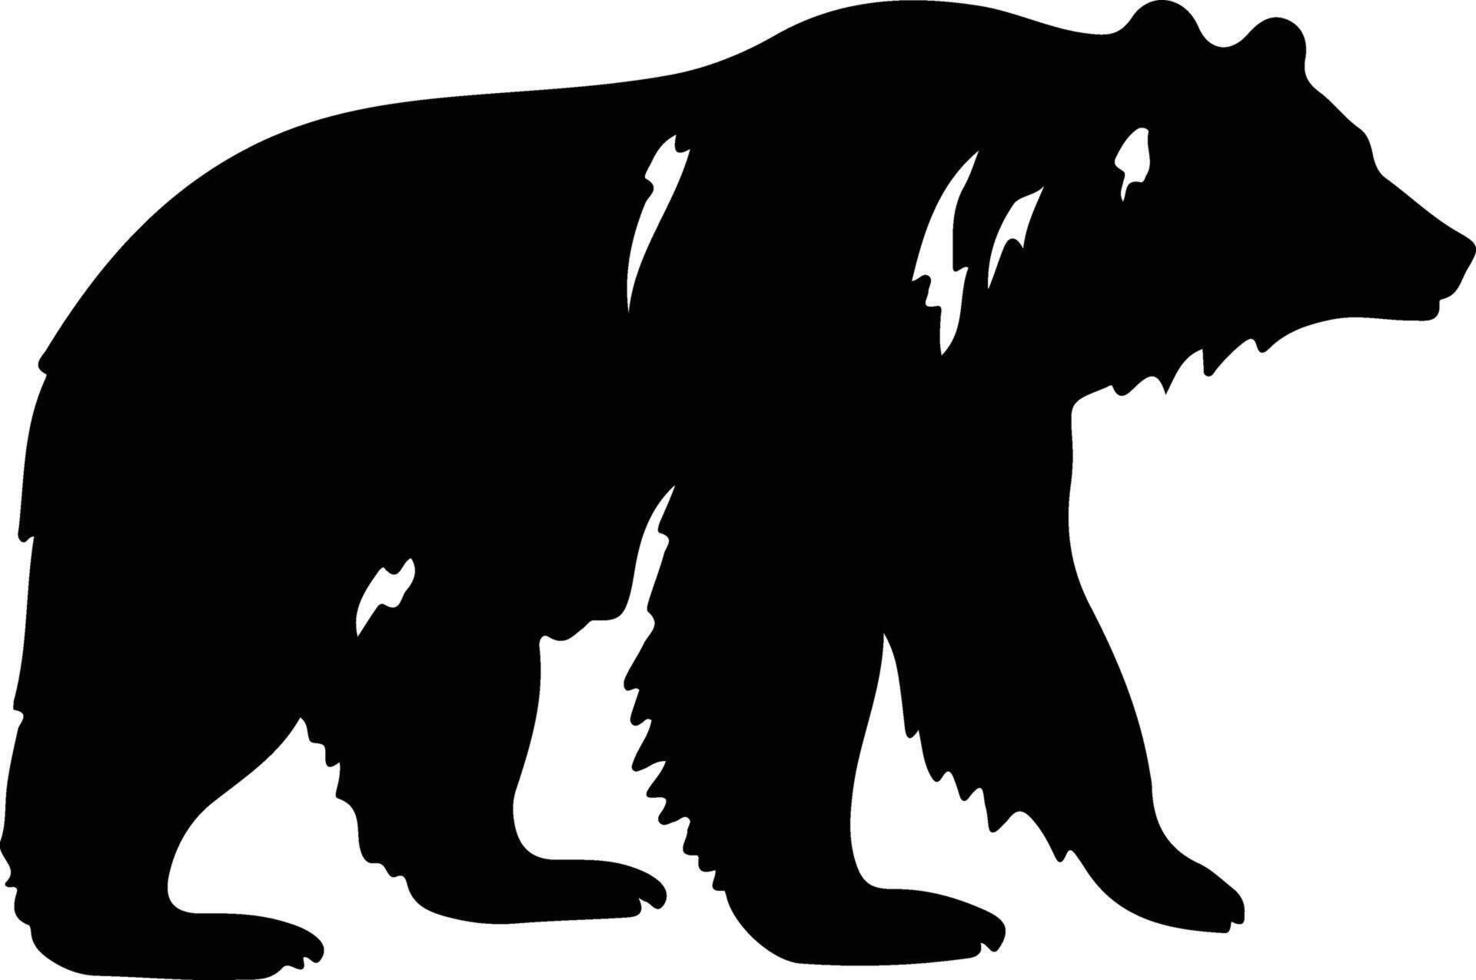 grizzly bear black silhouette vector